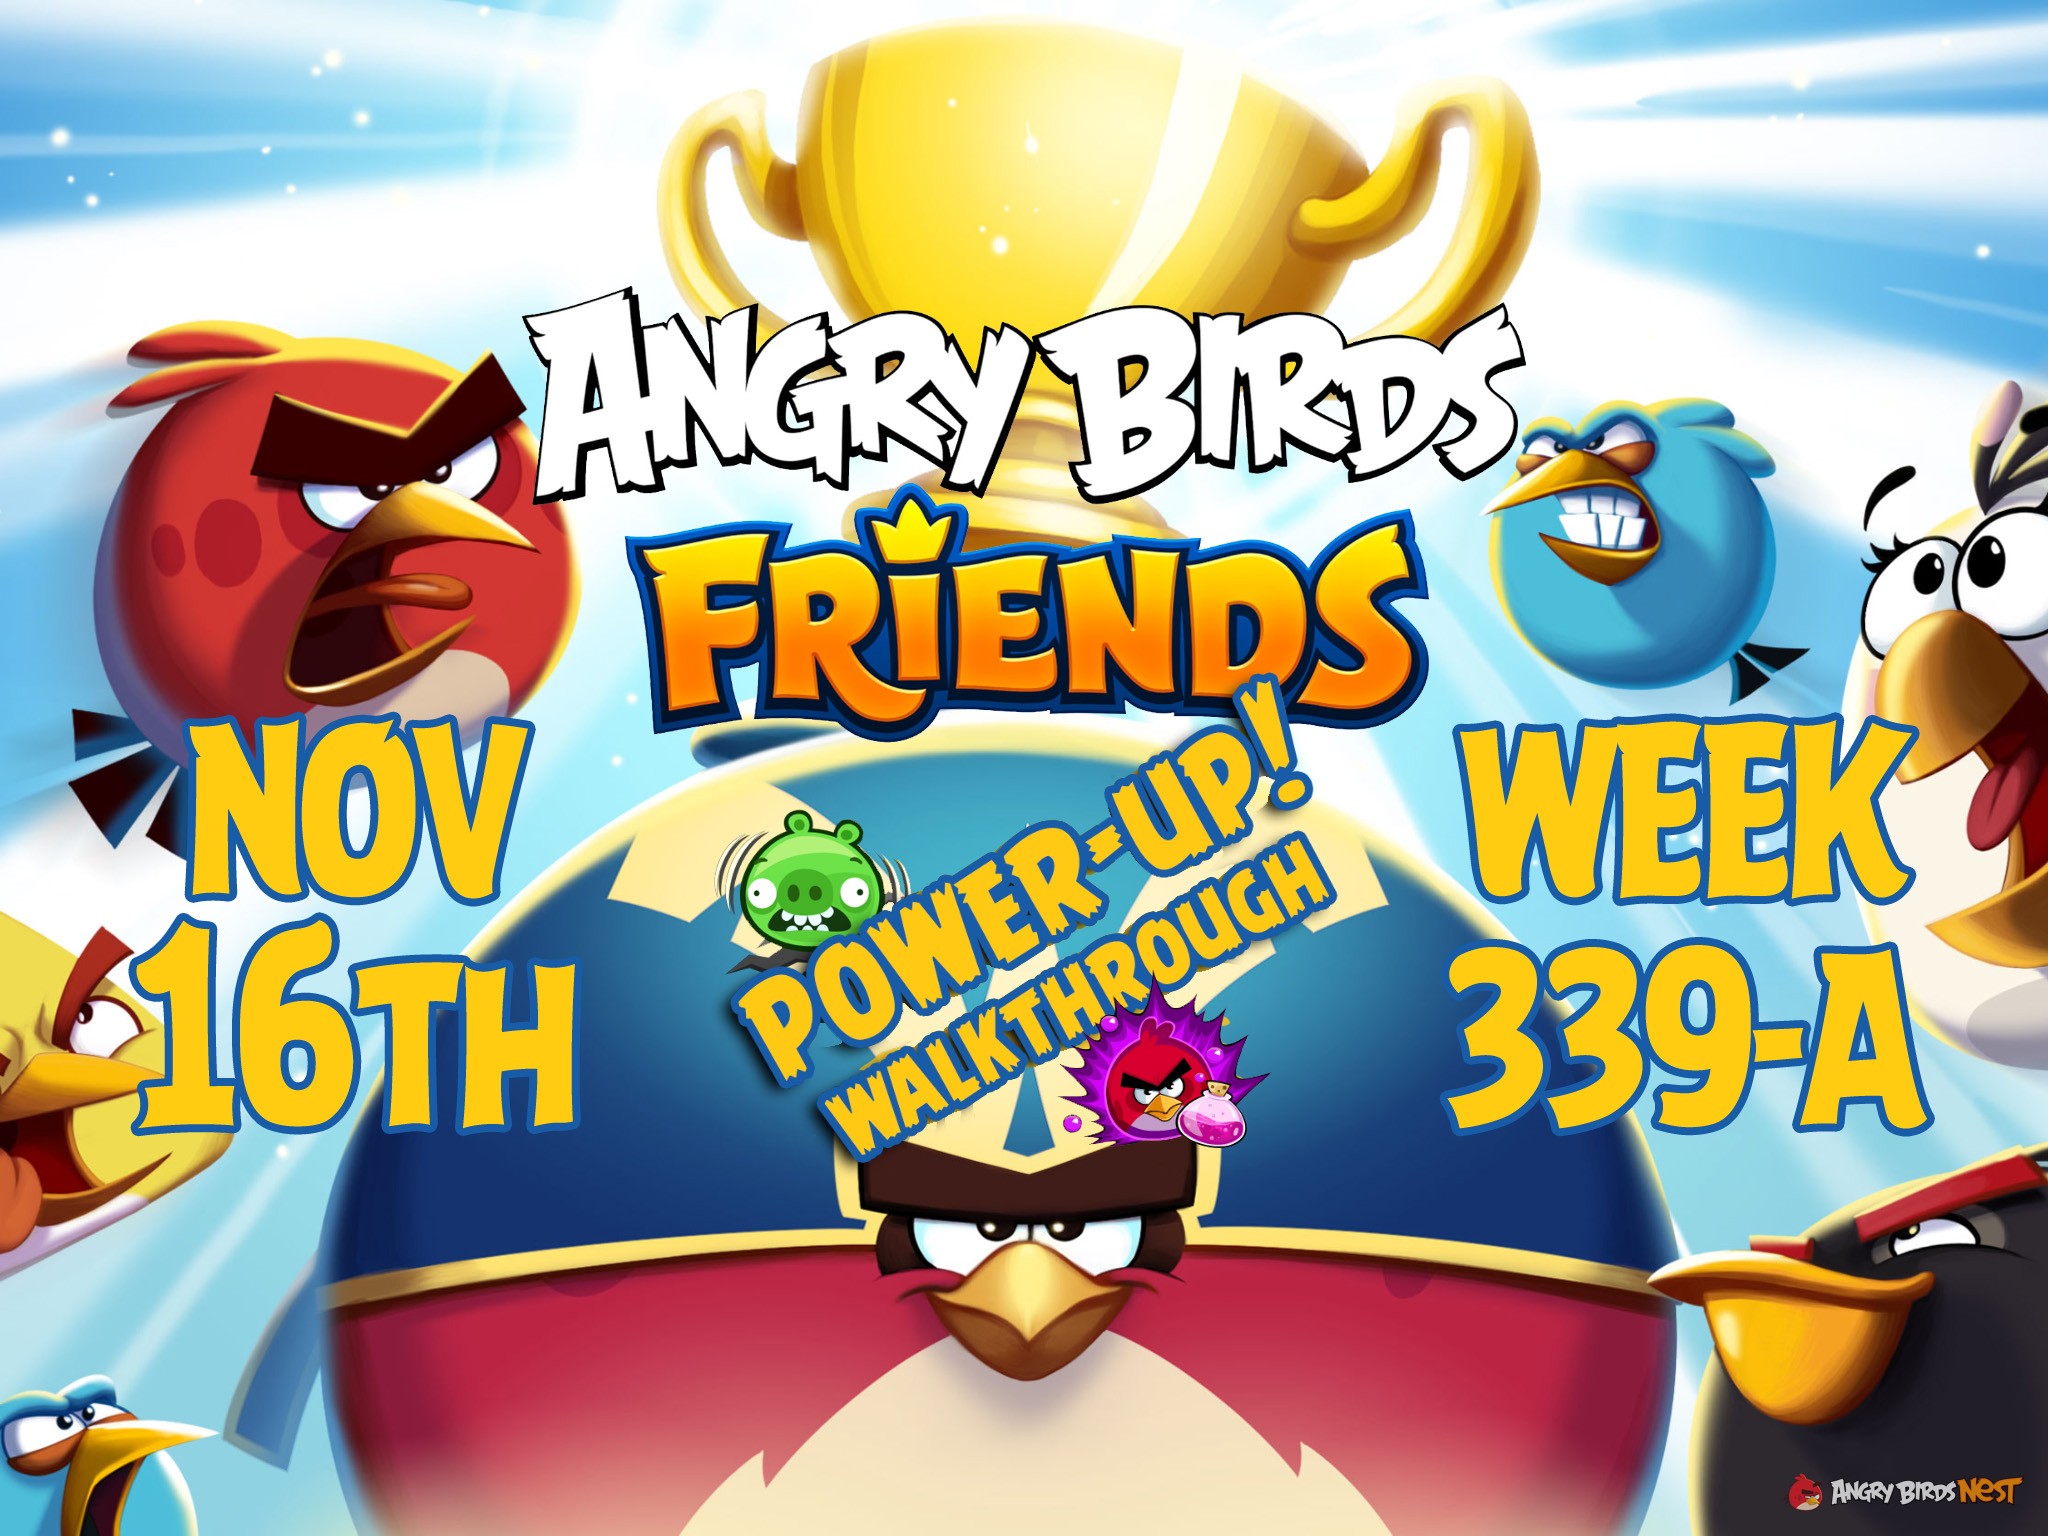 Angry-Birds-Friends-Tournament-Week-339-A-Feature-Image-PU